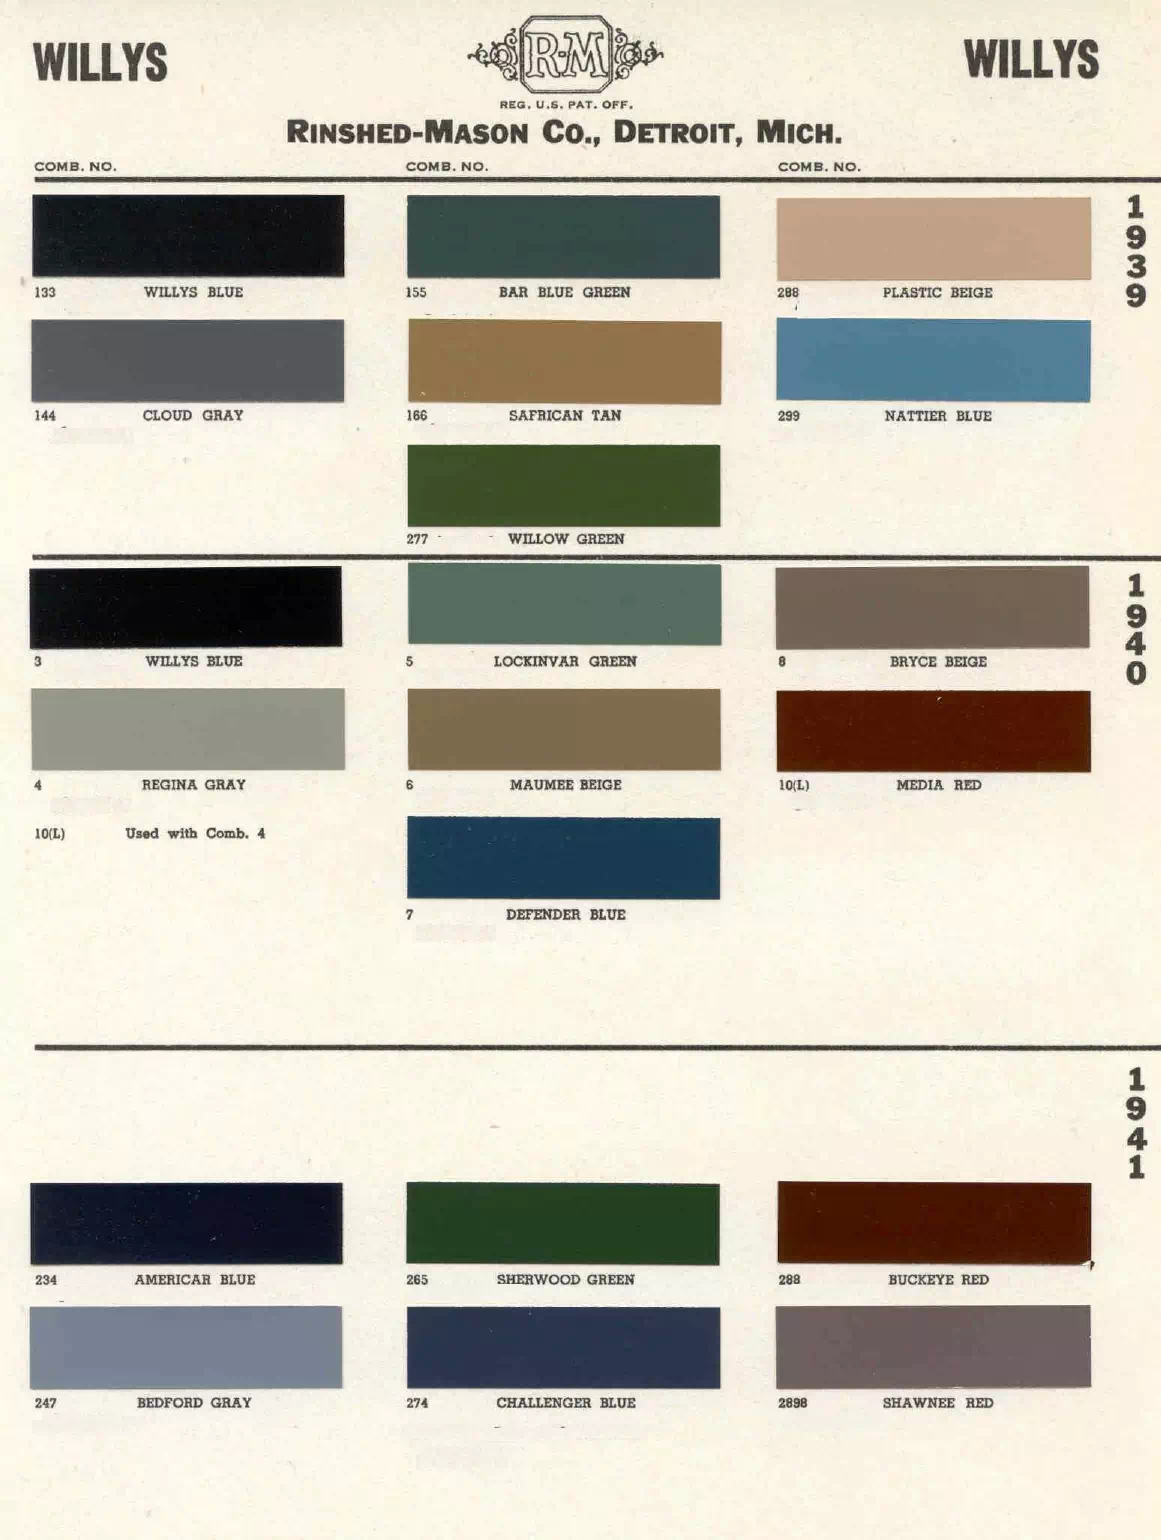 colors and ordering codes for those colors used on 1940 vehicles